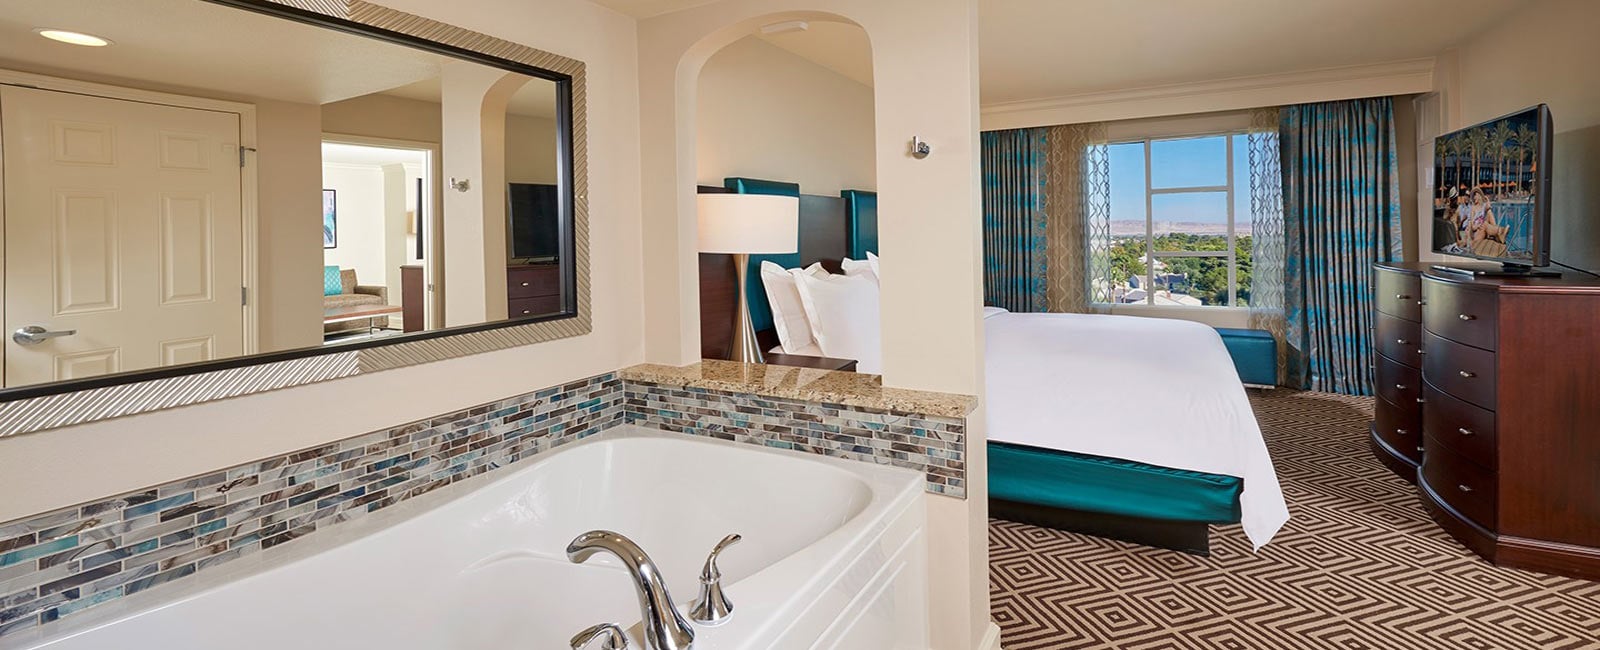 Bedroom and Tub at Hilton Grand Vacations on Paradise in Las Vegas, Nevada